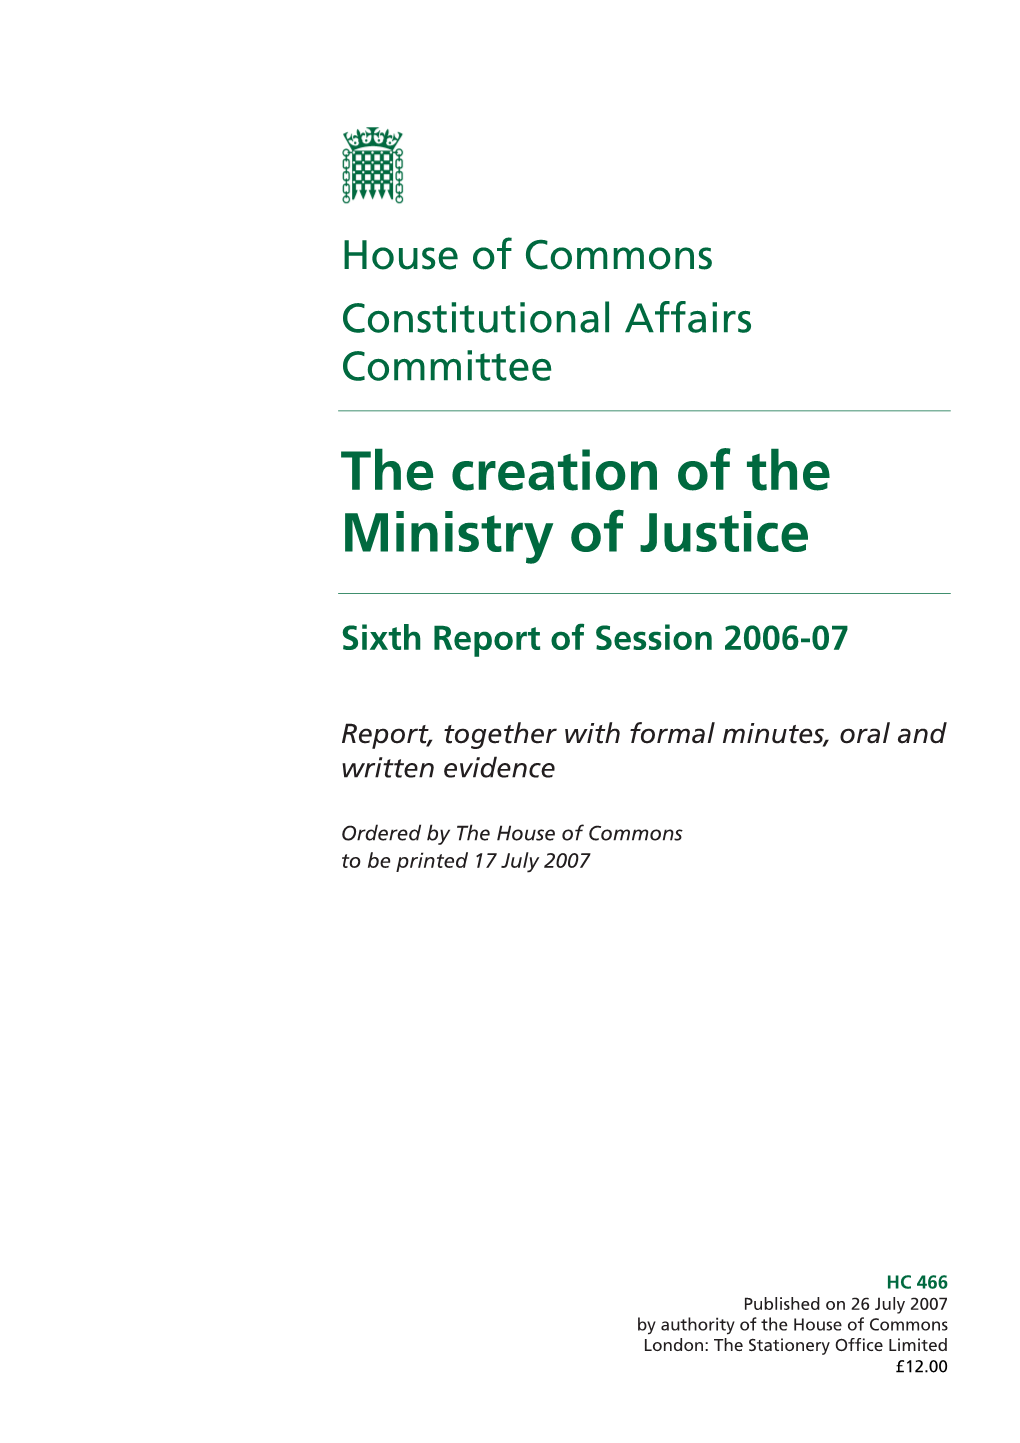 The Creation of the Ministry of Justice